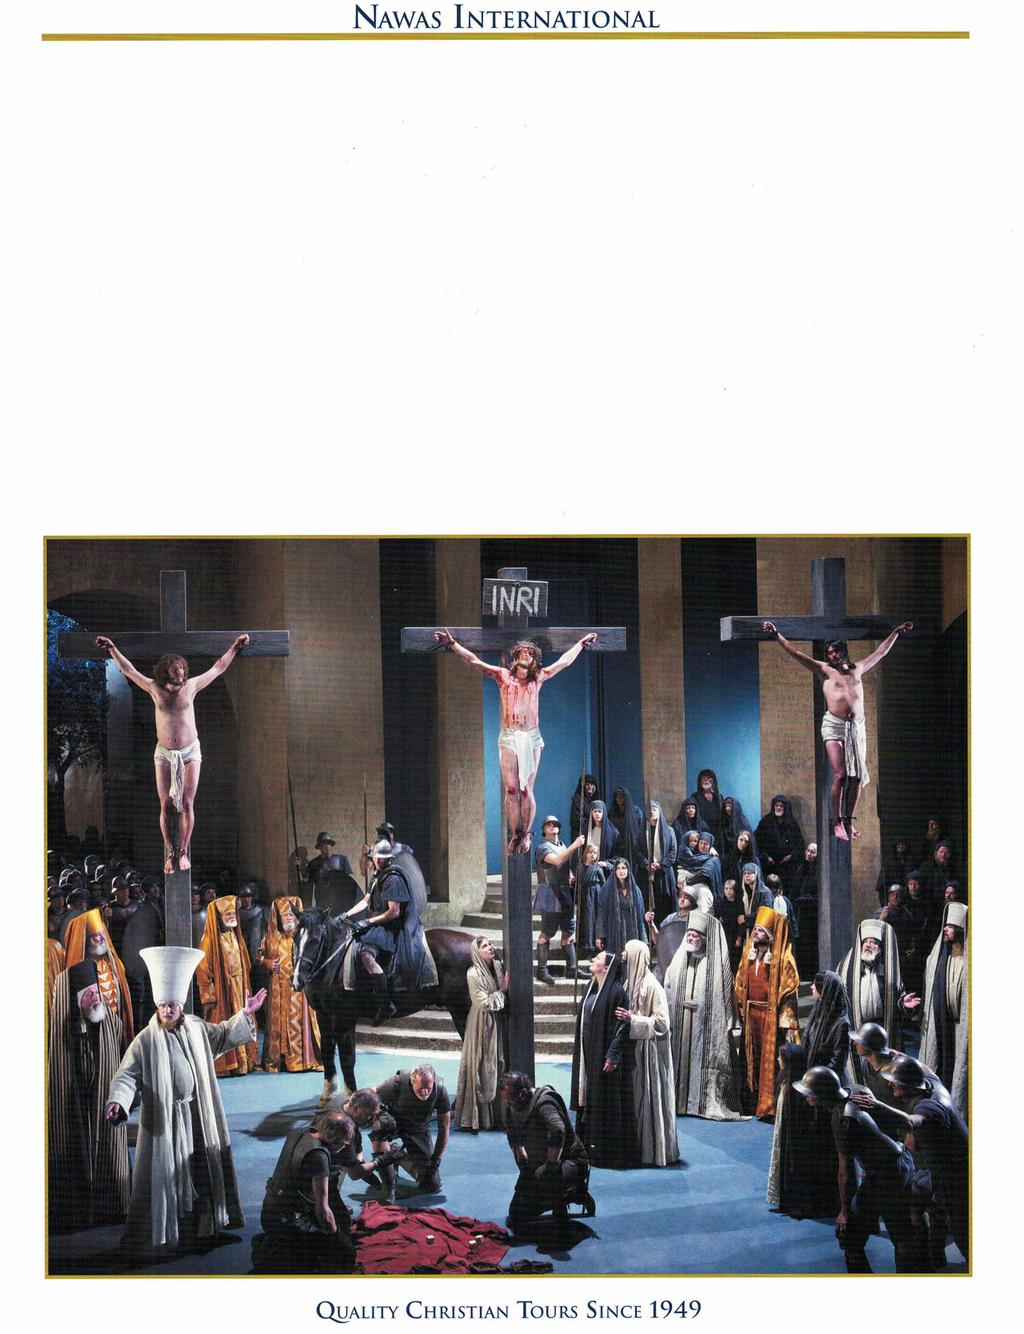 PILGRIMAGE TO POLAND, PRAGUE AND GERMANY Including THE WORLD FAMOUS PASSION PLAY OF OBERAMMERGAU 11 Days: May 26 - June 5, 2020 Visiting Warsaw Czestochowa Krakow Wadowice